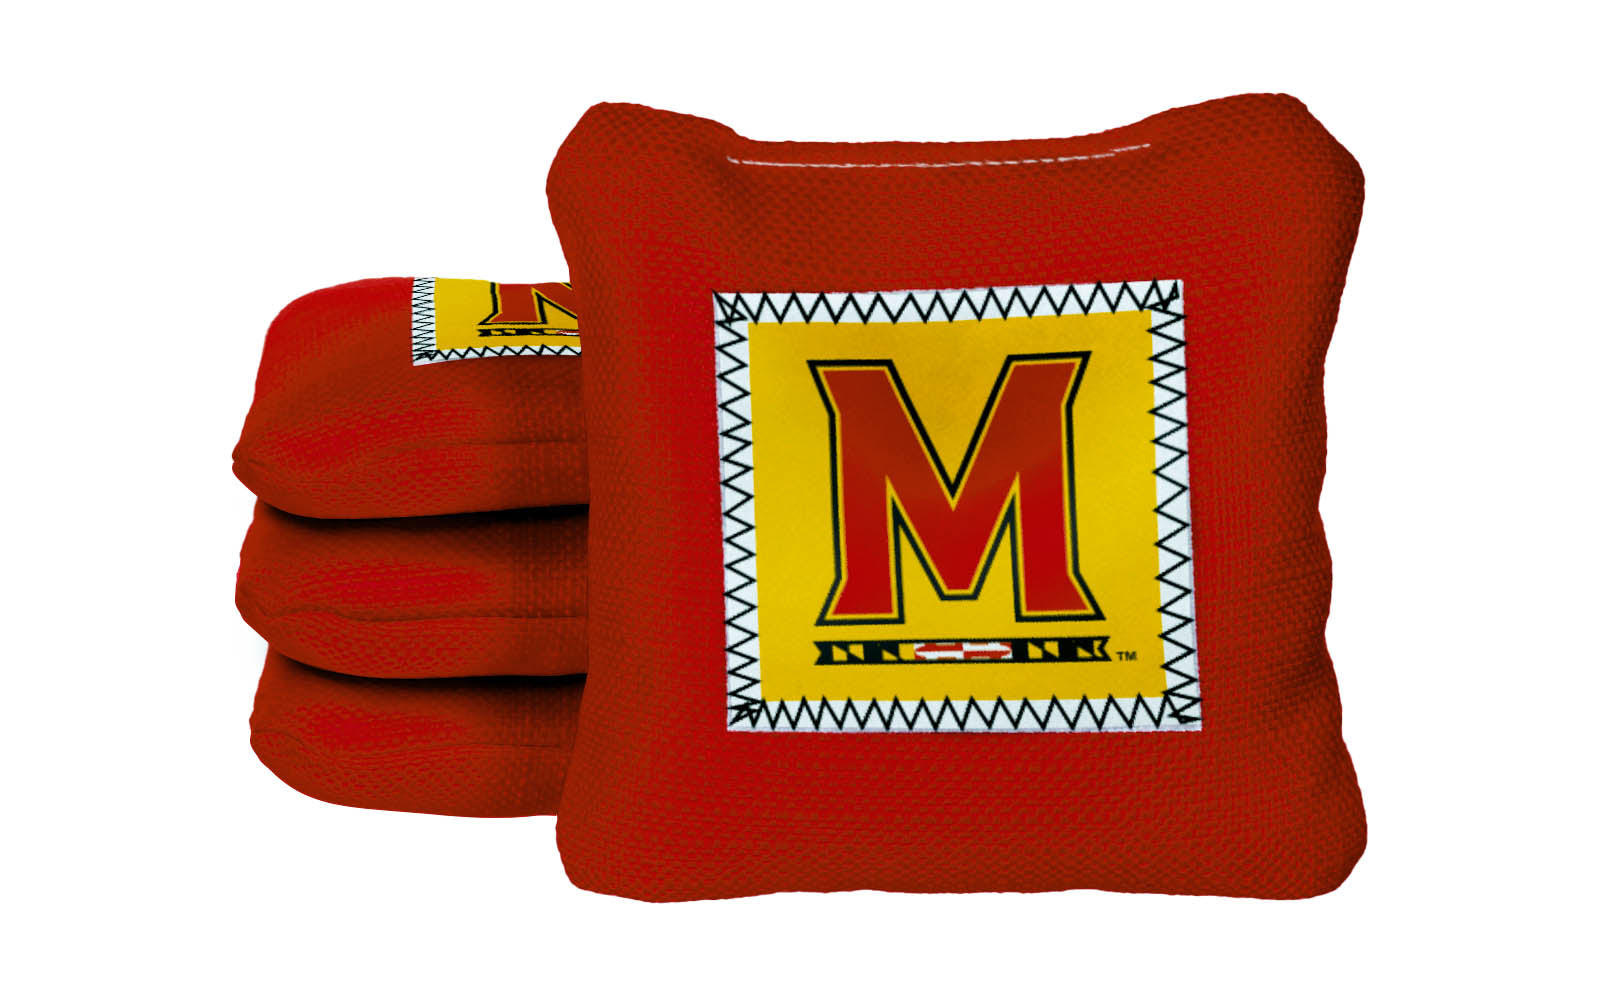 Officially Licensed Collegiate Cornhole Bags - Gamechanger Steady 2.0 - Set of 4 - University of Maryland